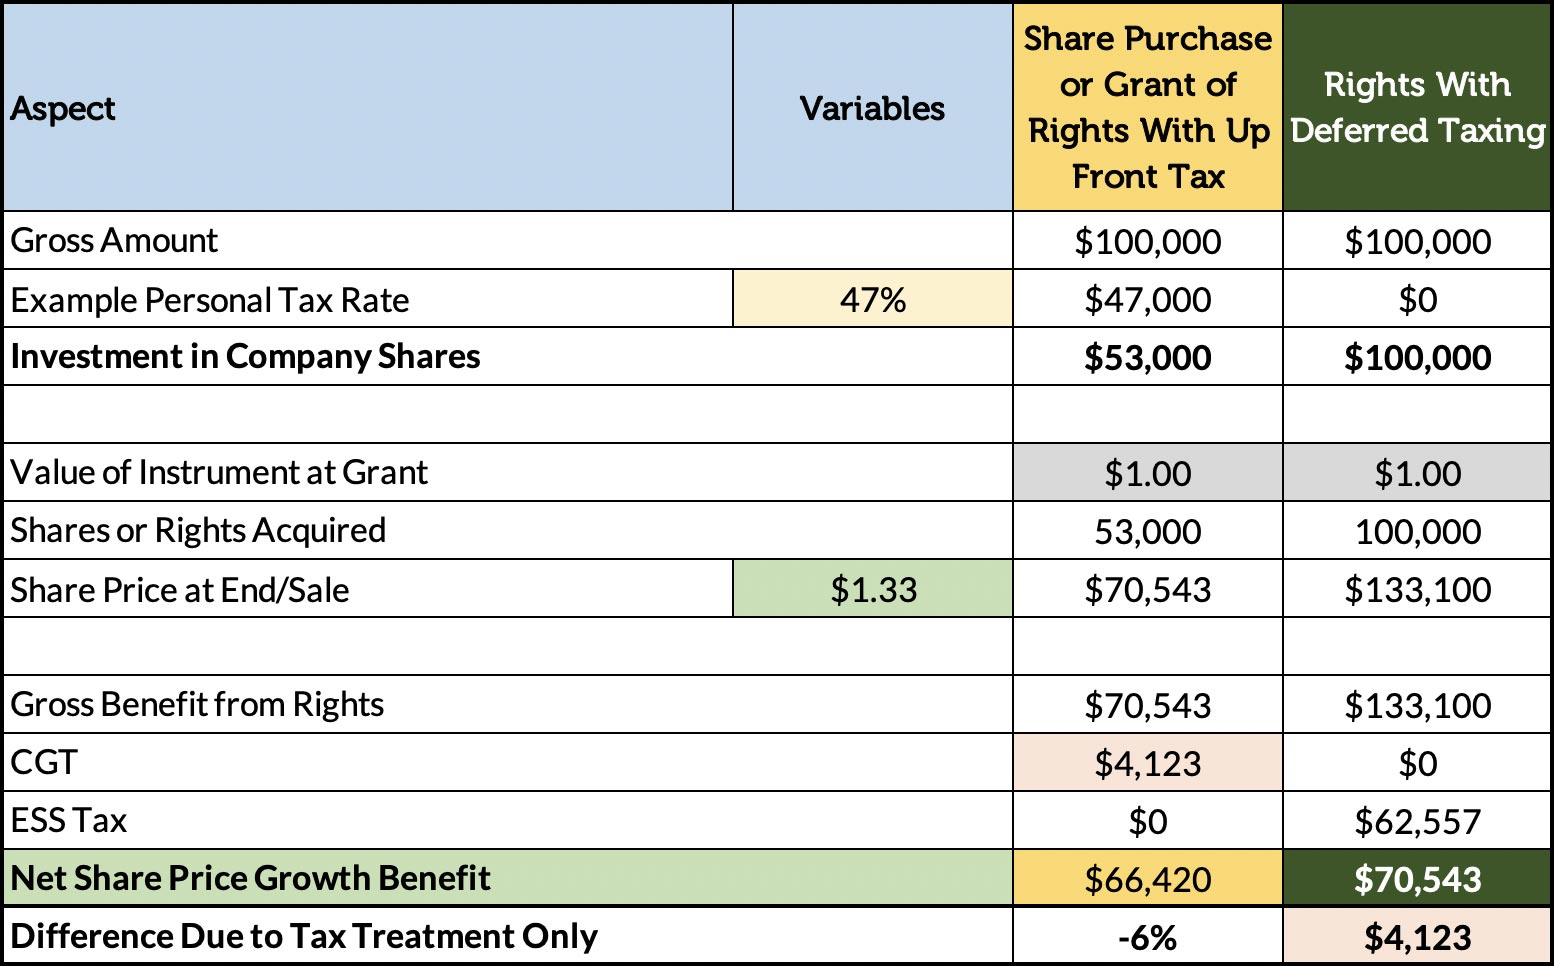 This simplified example shows the outcome of up-front tax and CGT treatment from day 1, compared to ESS tax deferral, ignoring discounts and dividends